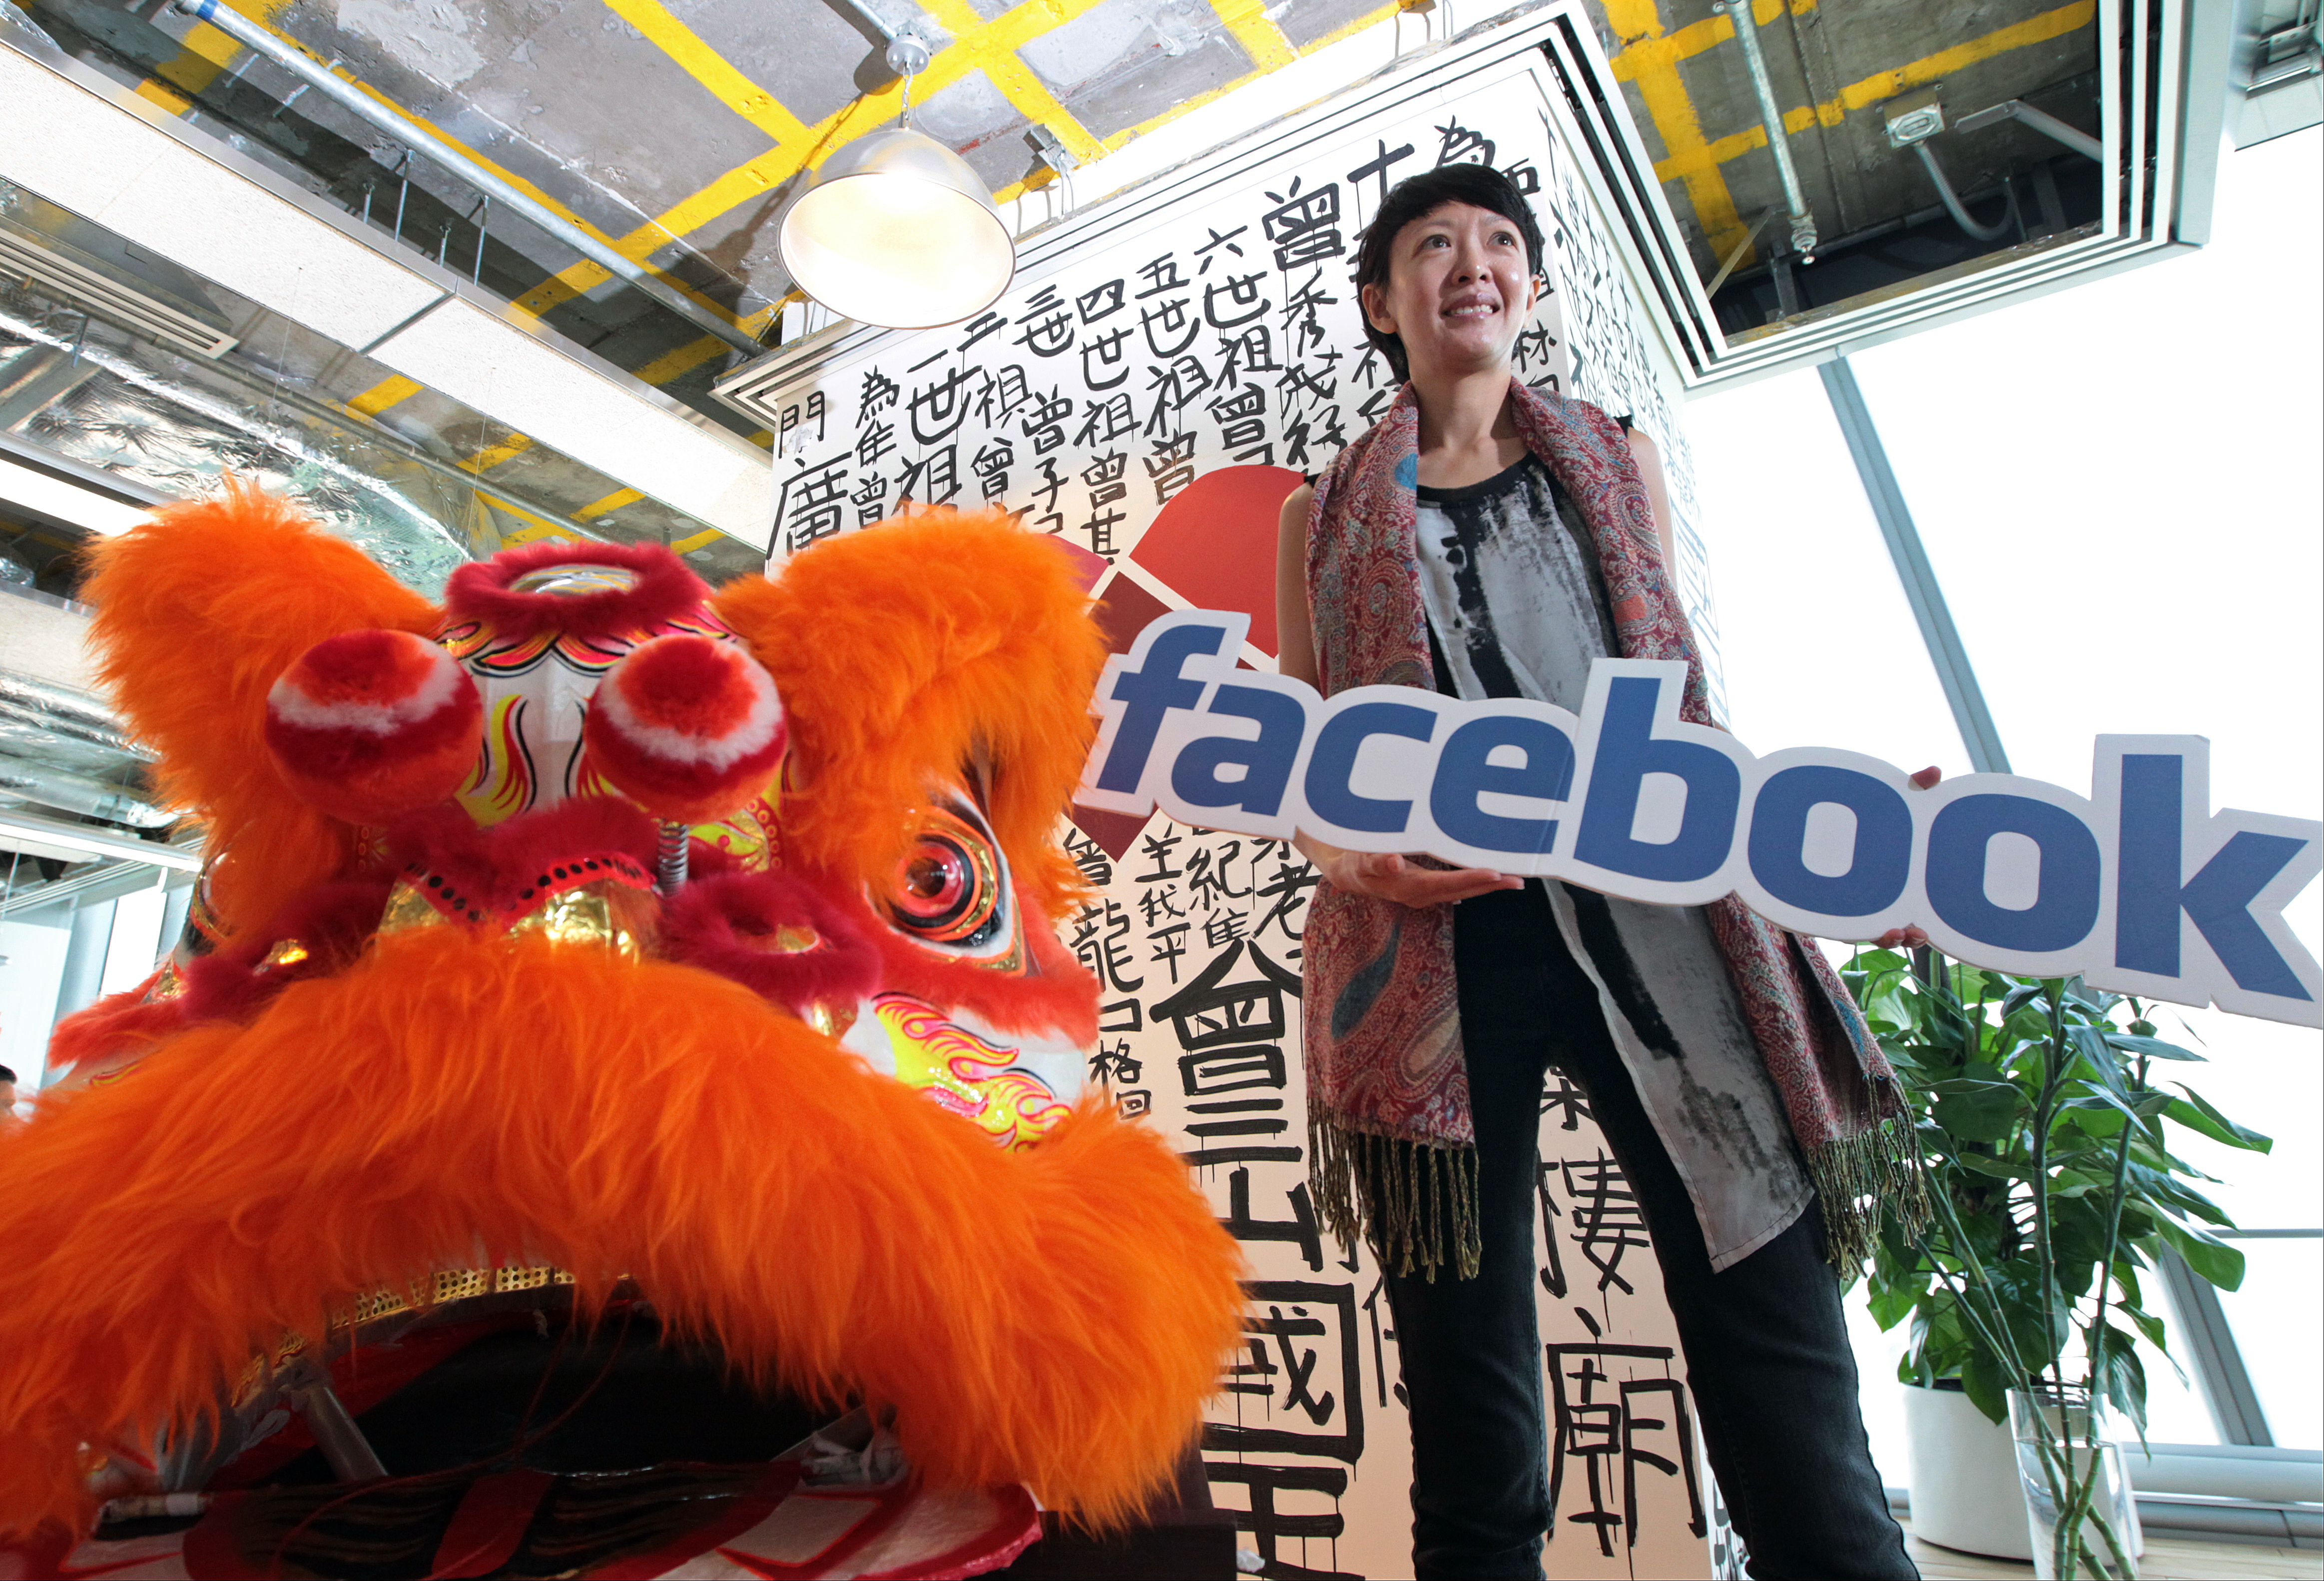 Jayne Leung, head of Greater China for Facebook. Photo: Bruce Yan